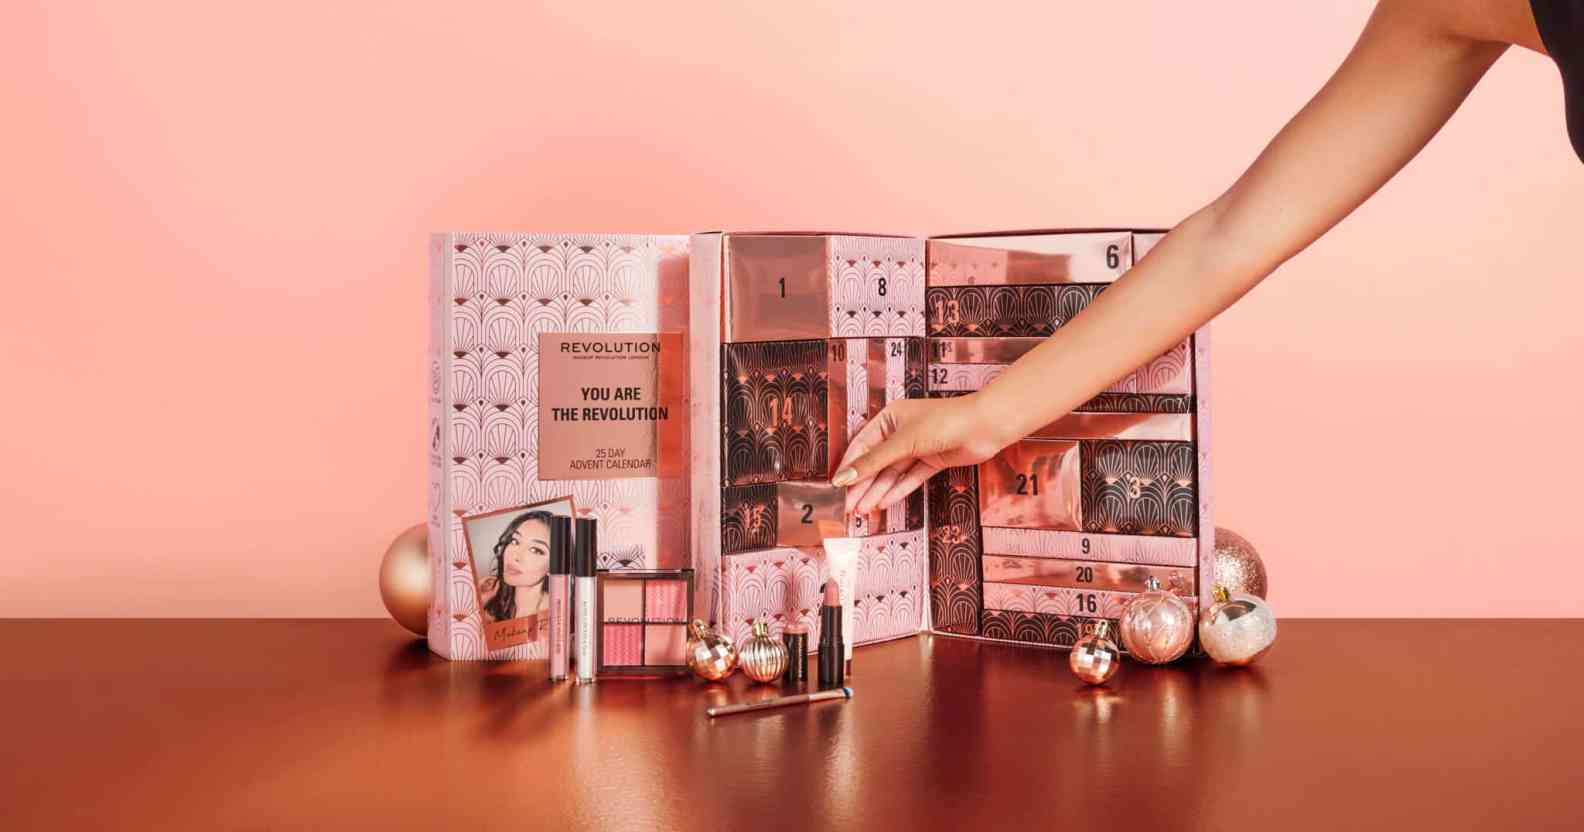 The Revolution Beauty advent calender features products worth £95 for £45.